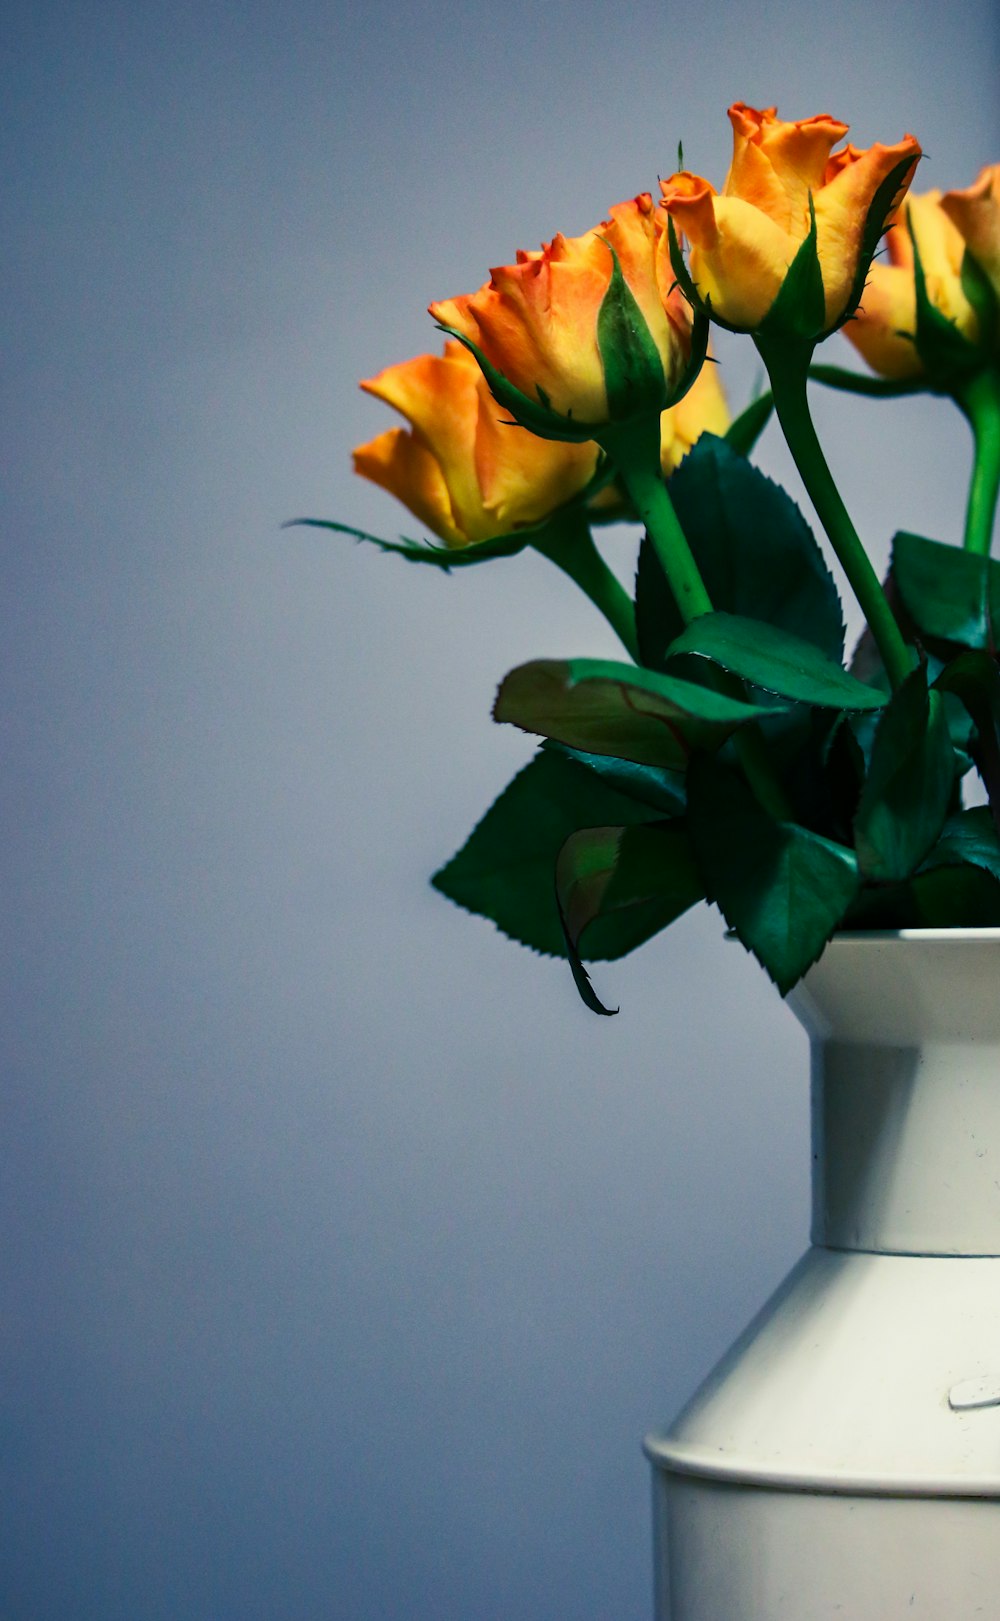 yellow, red, and green flowers on vase